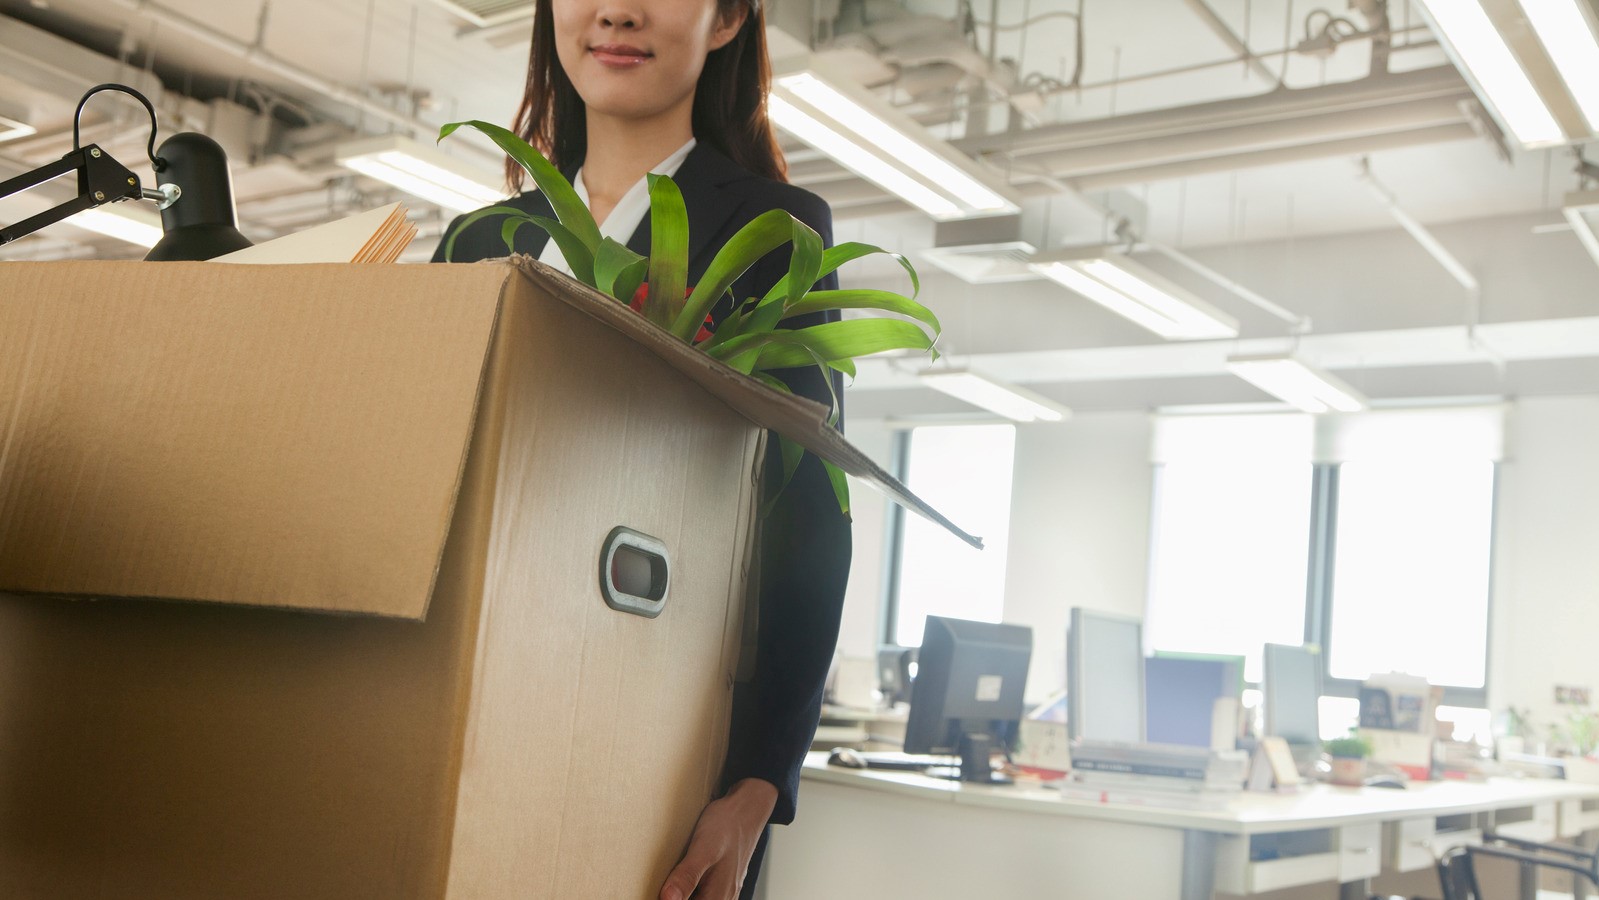 Woman carrying box in office setting